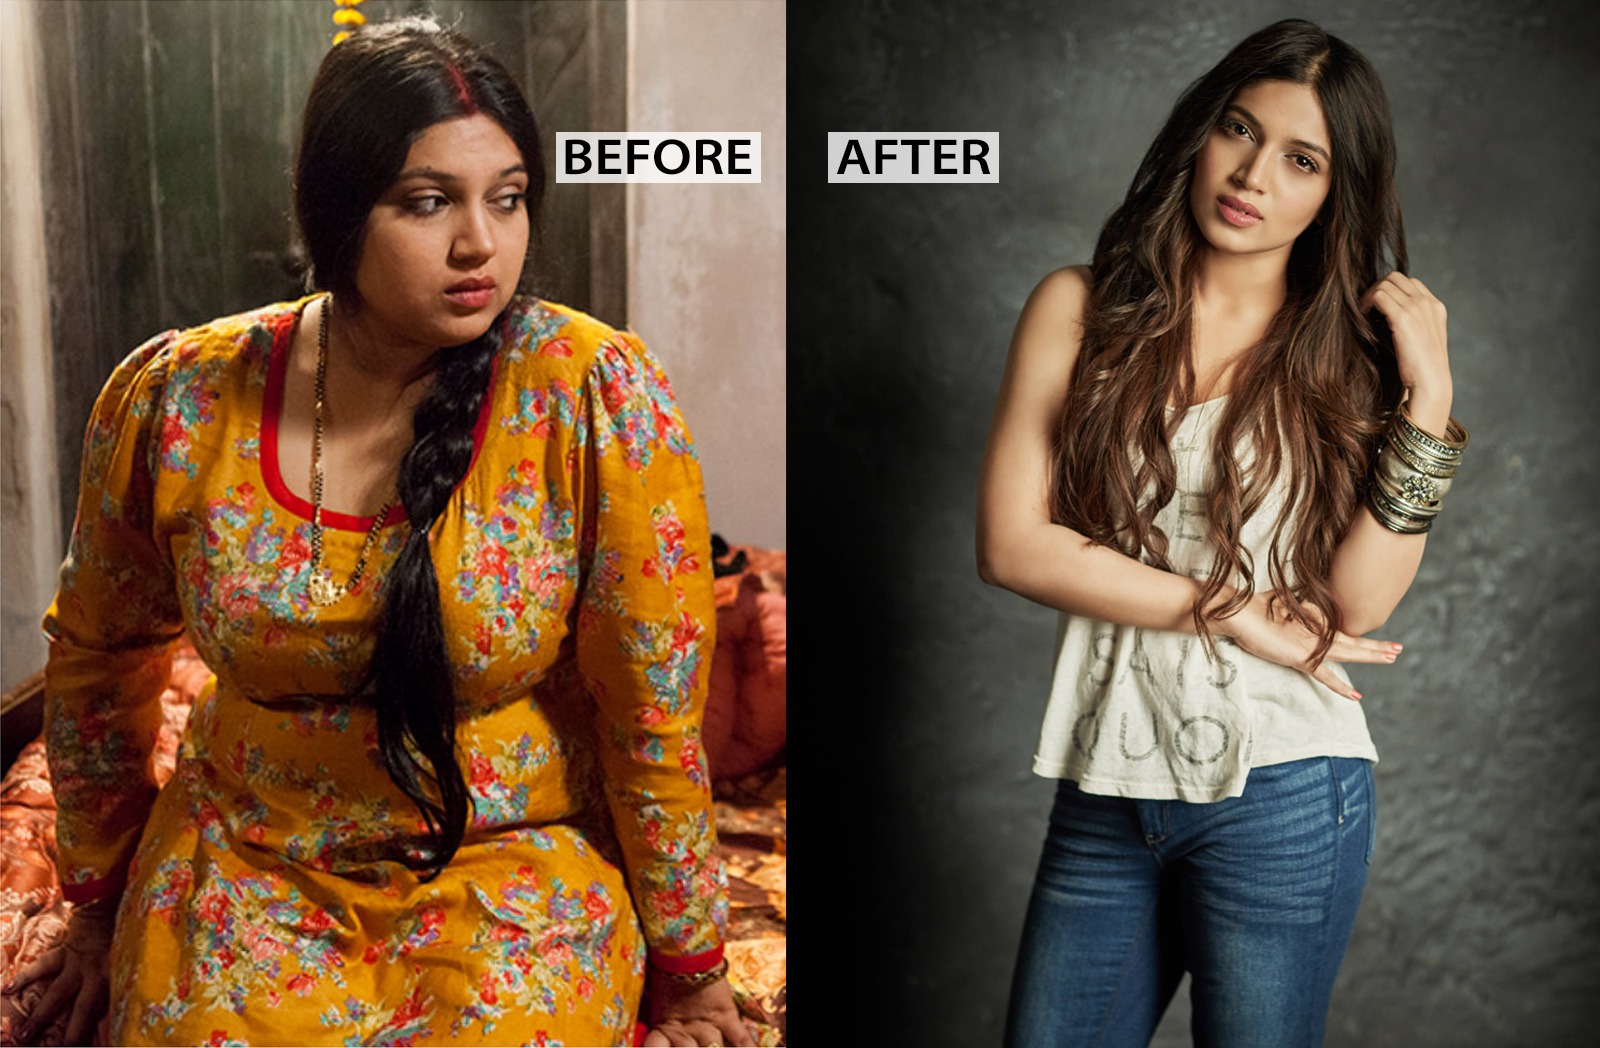 Image result for bhumi pednekar then and now